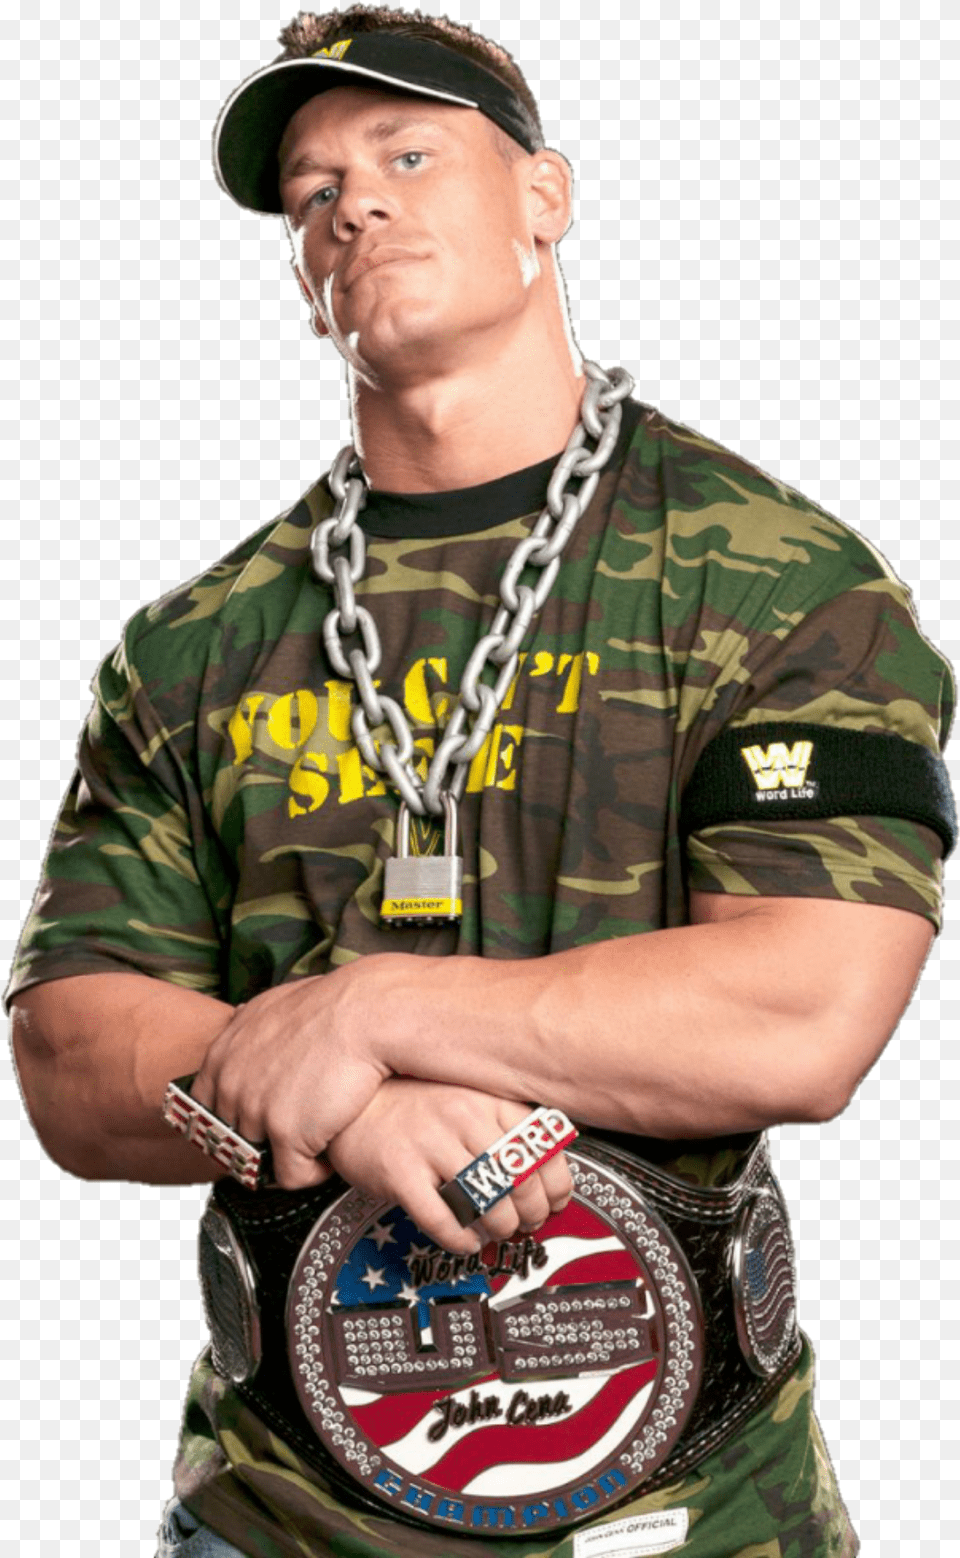 Image Id John Cena United States Championship, Adult, Male, Man, Person Png